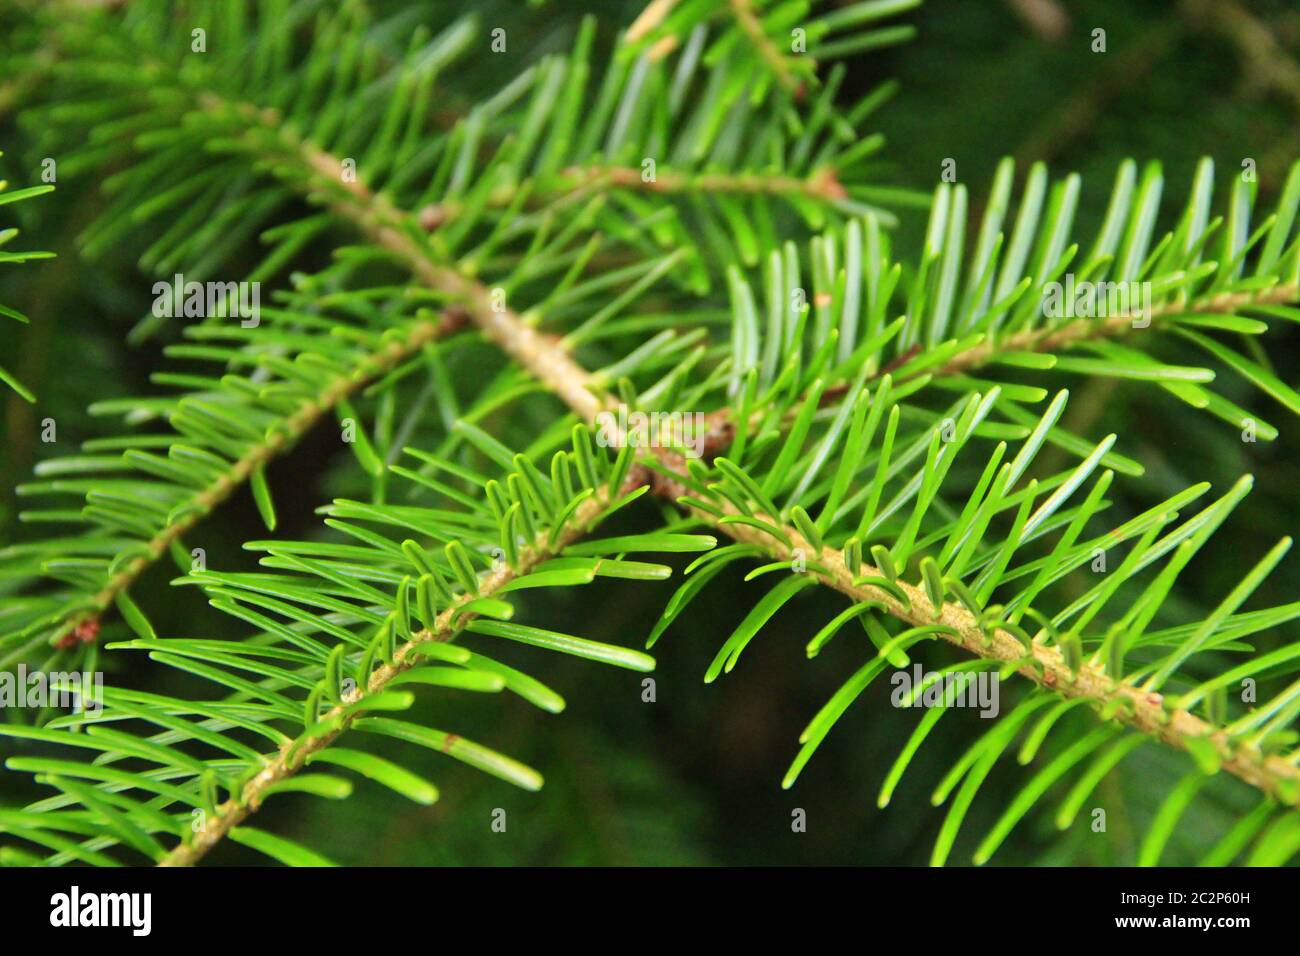 Green Christmas tree branch close-up in forest. Spruce branches with needles Stock Photo